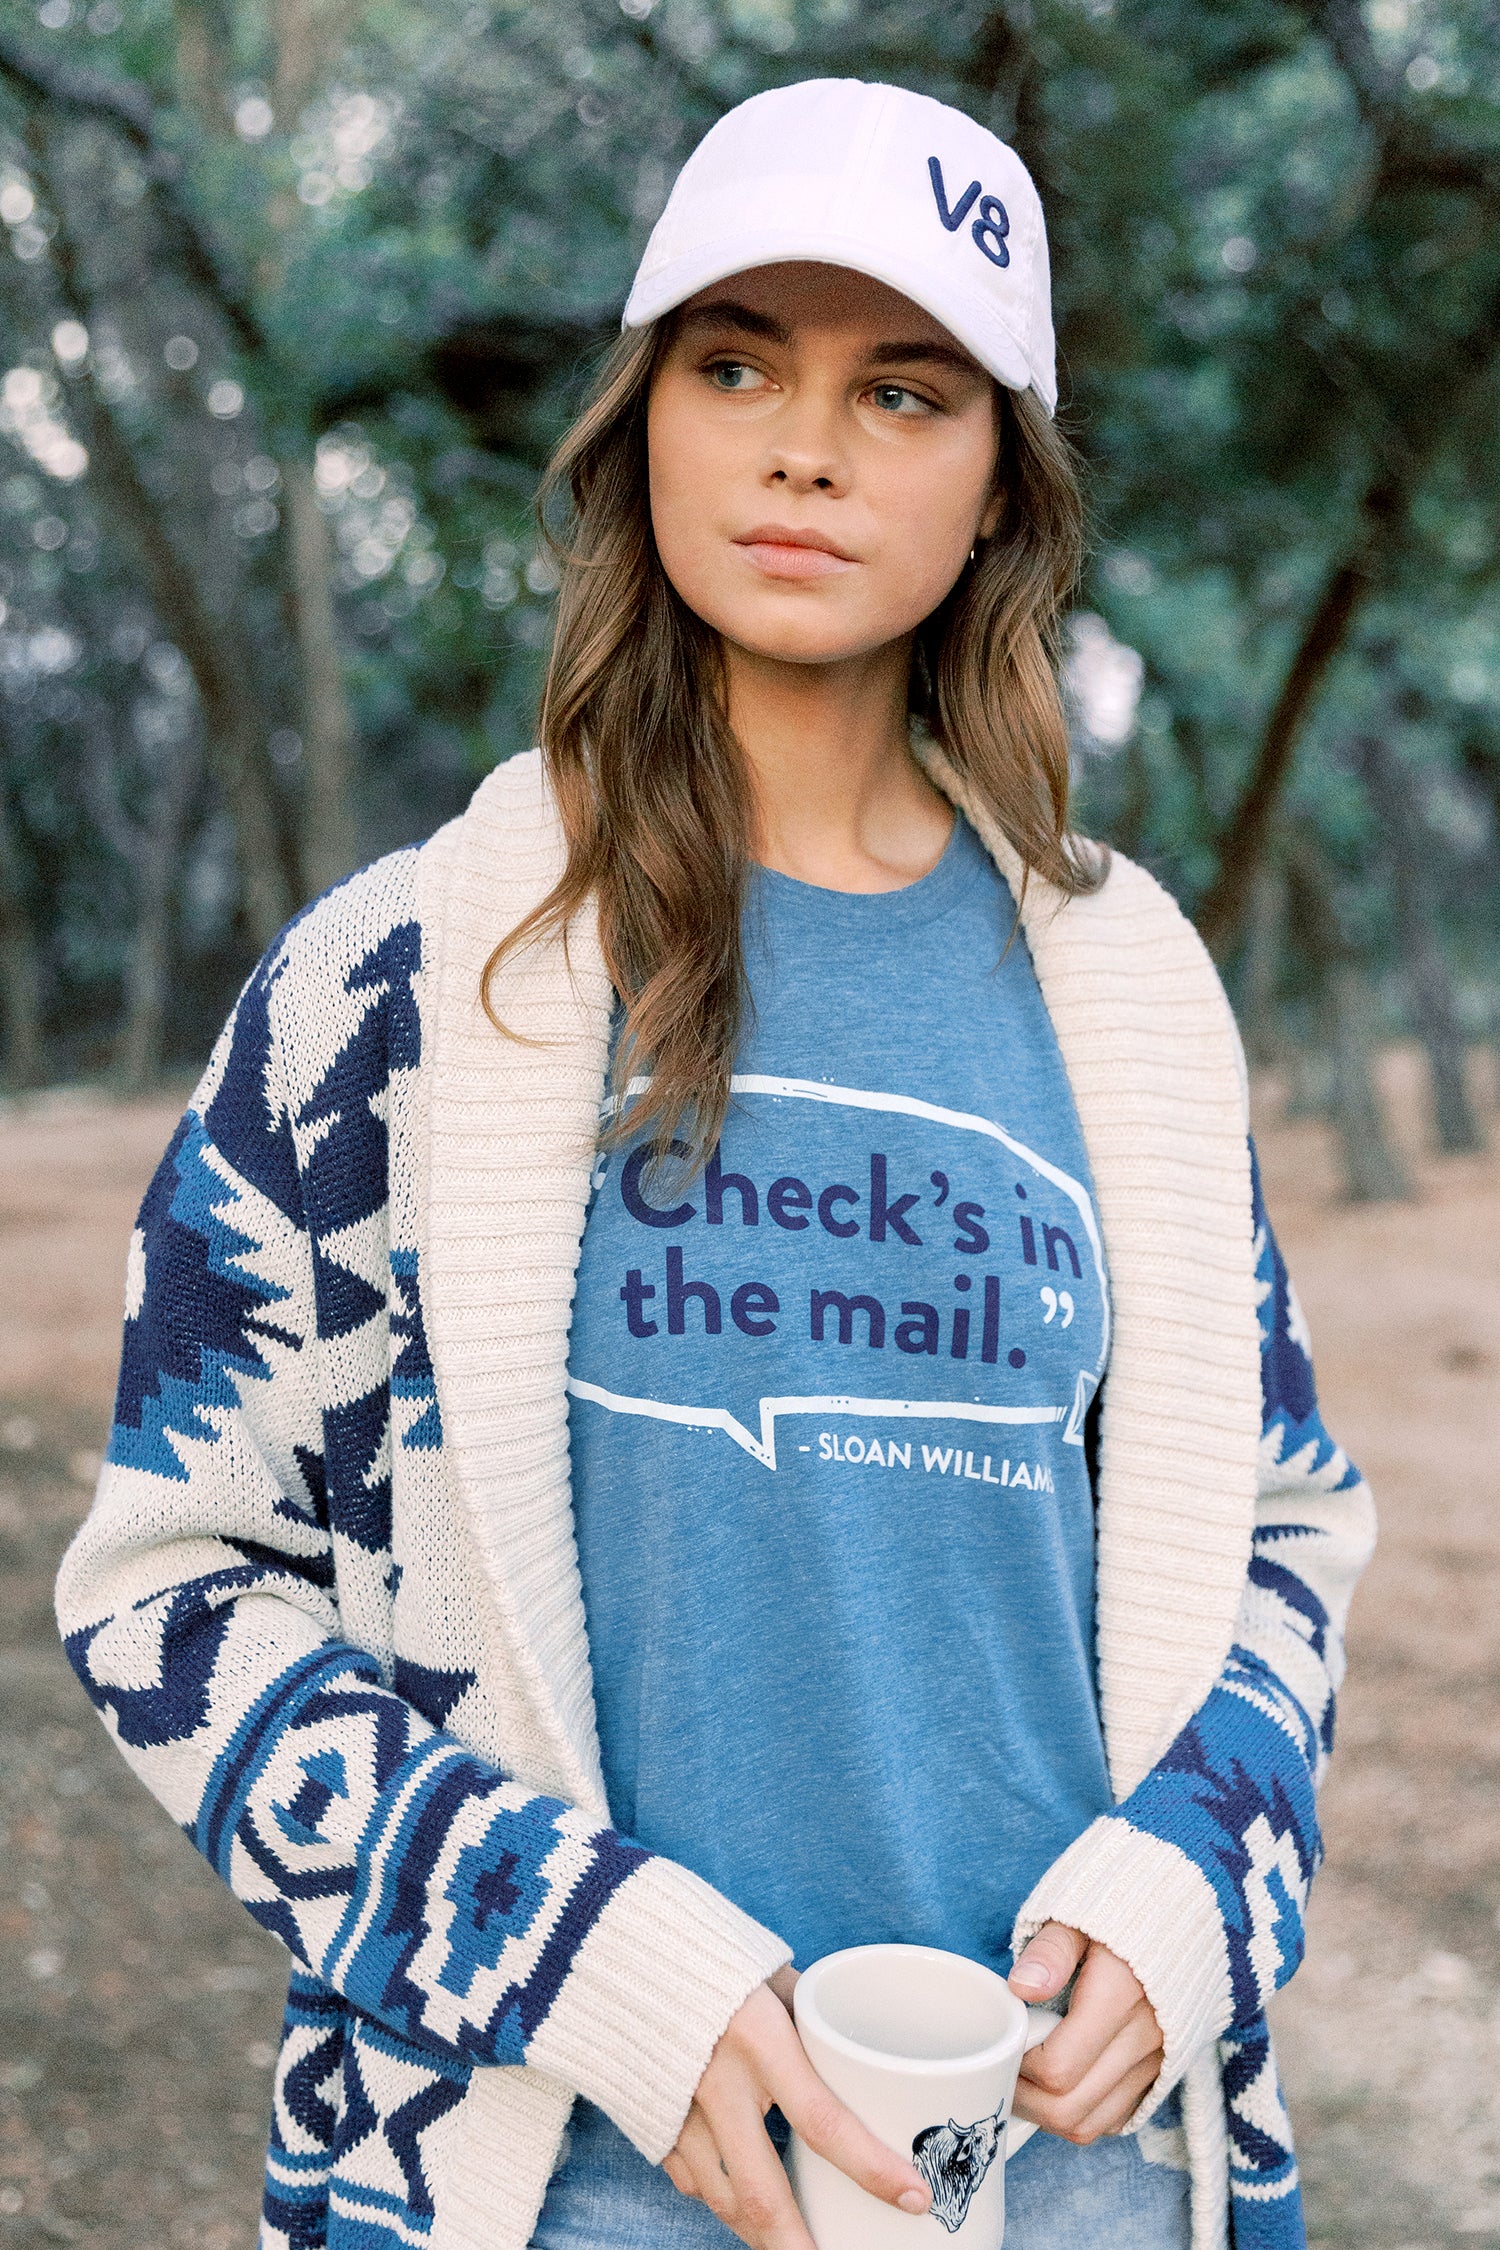 "Check's In The Mail" Sloan Williams Collection V8 Tee